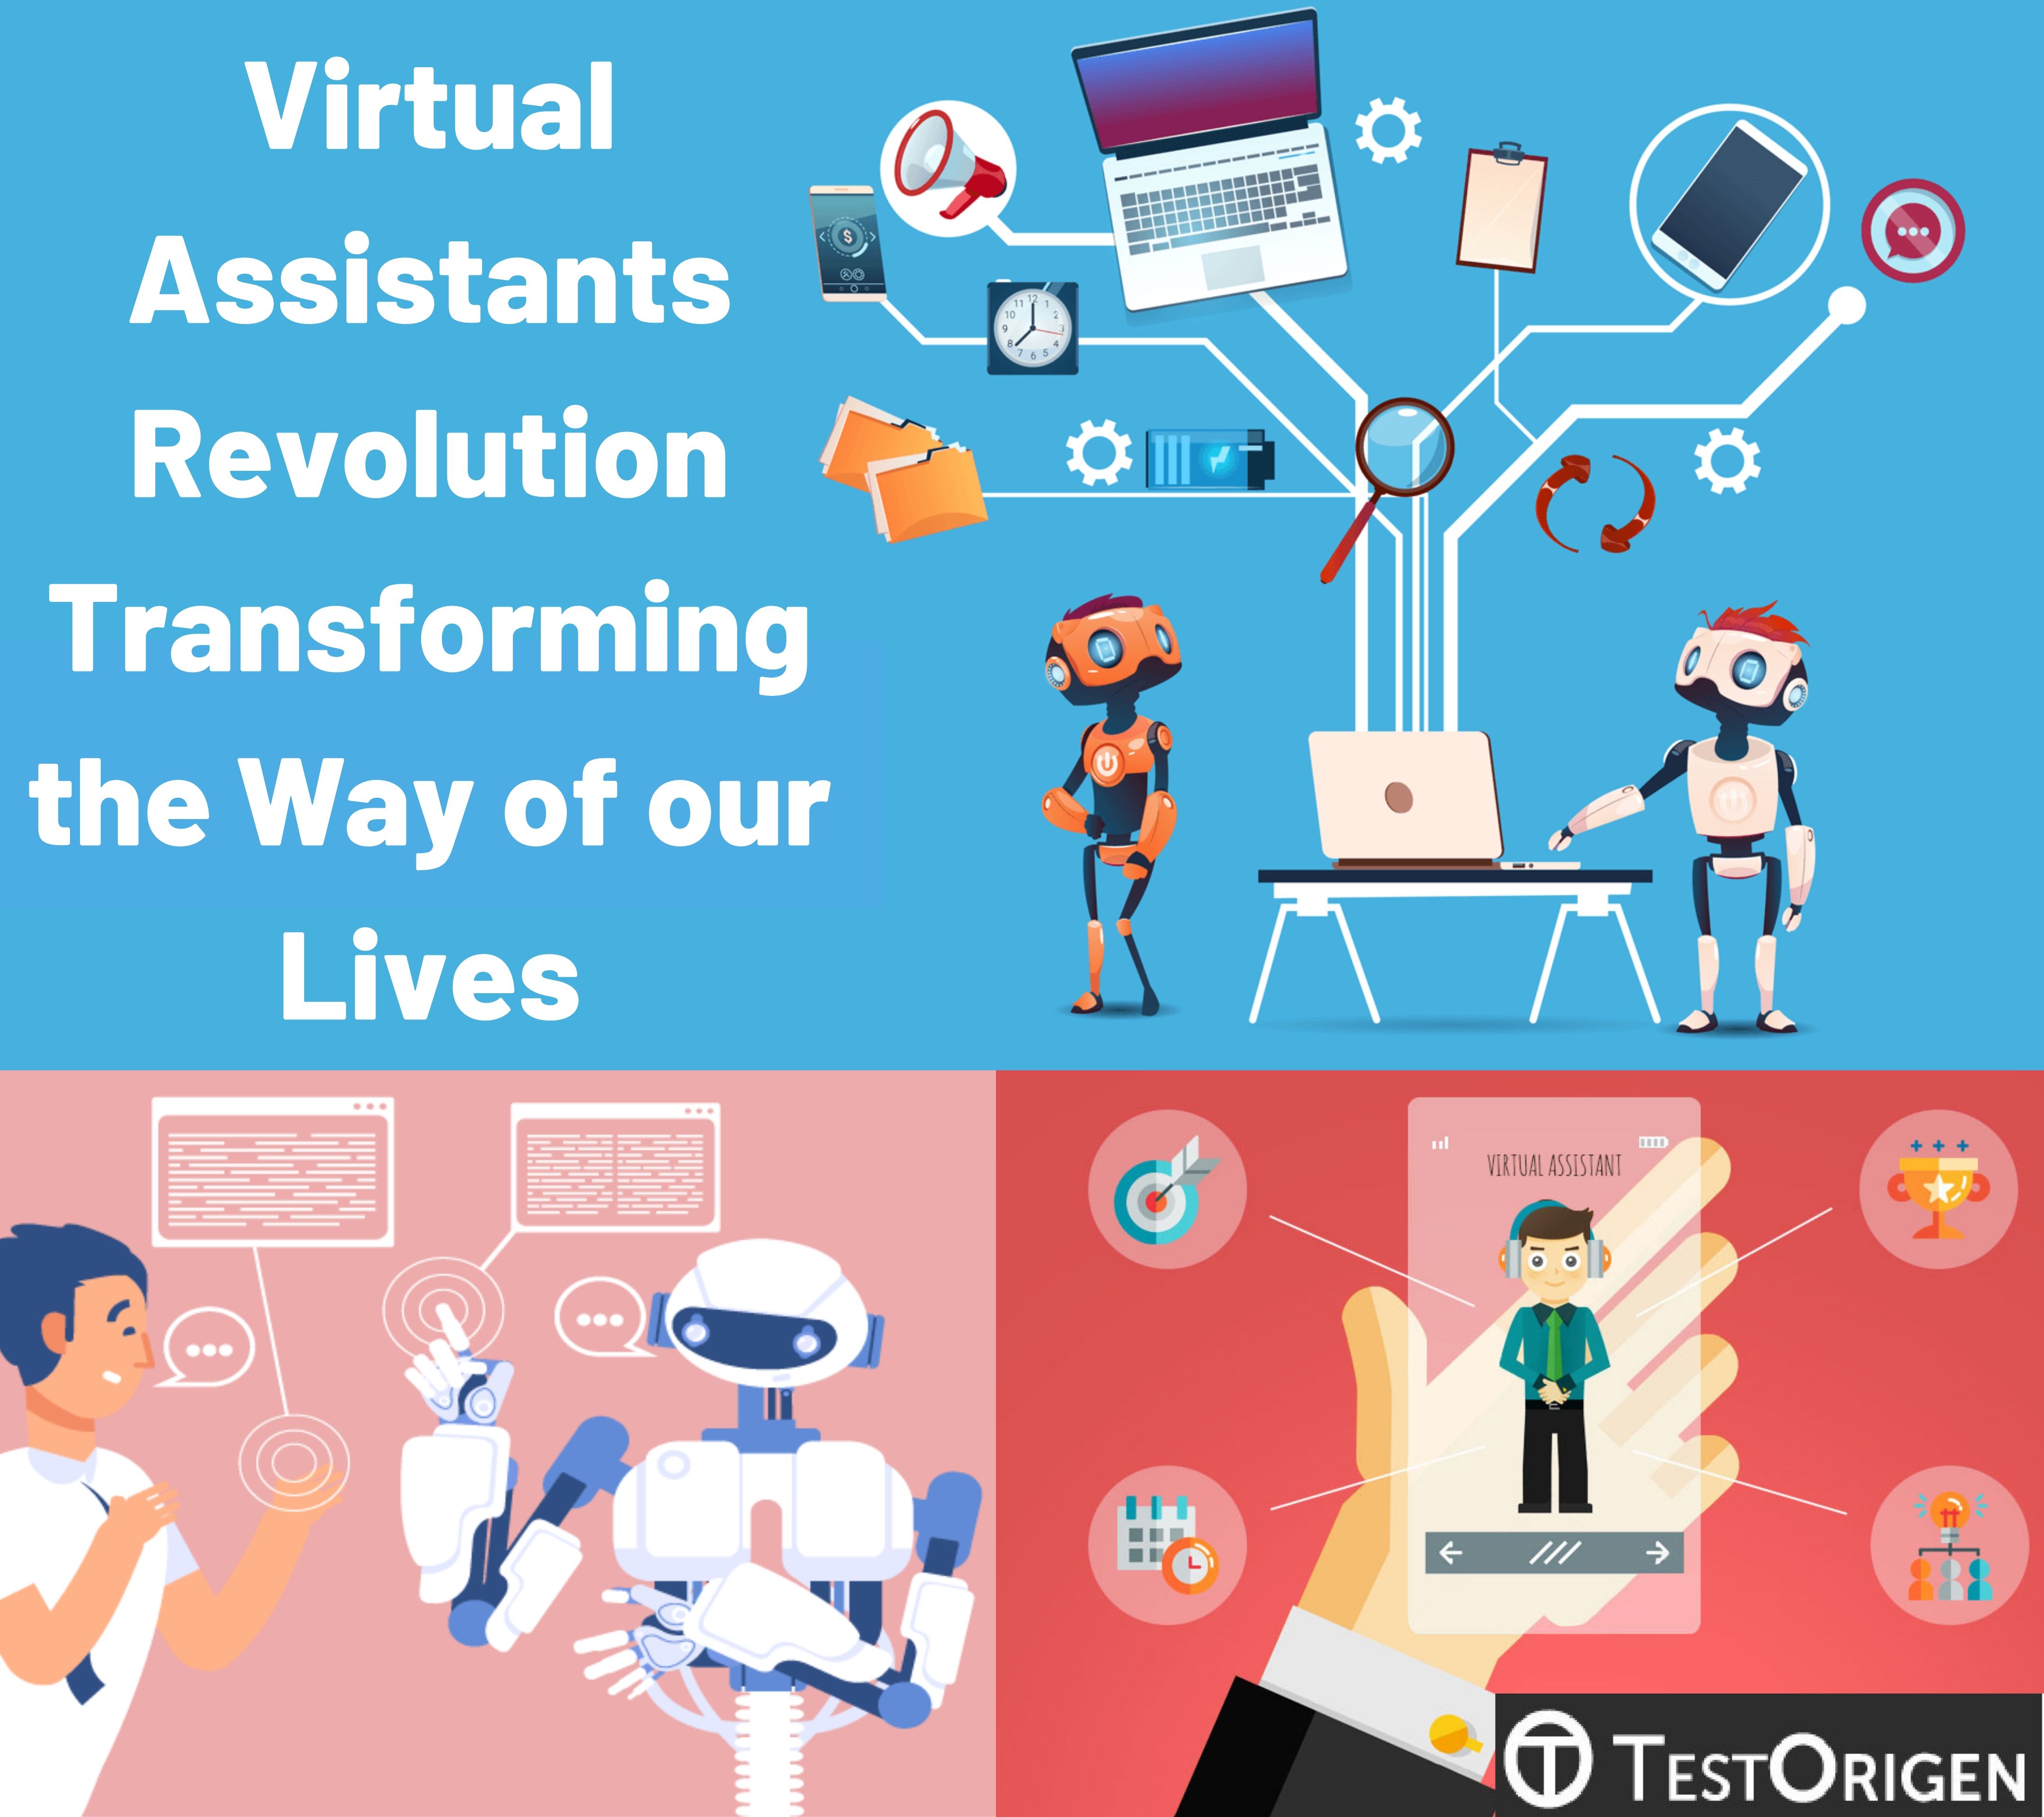 Virtual Assistants Revolution Transforming the Way of our Lives. virtual assistants